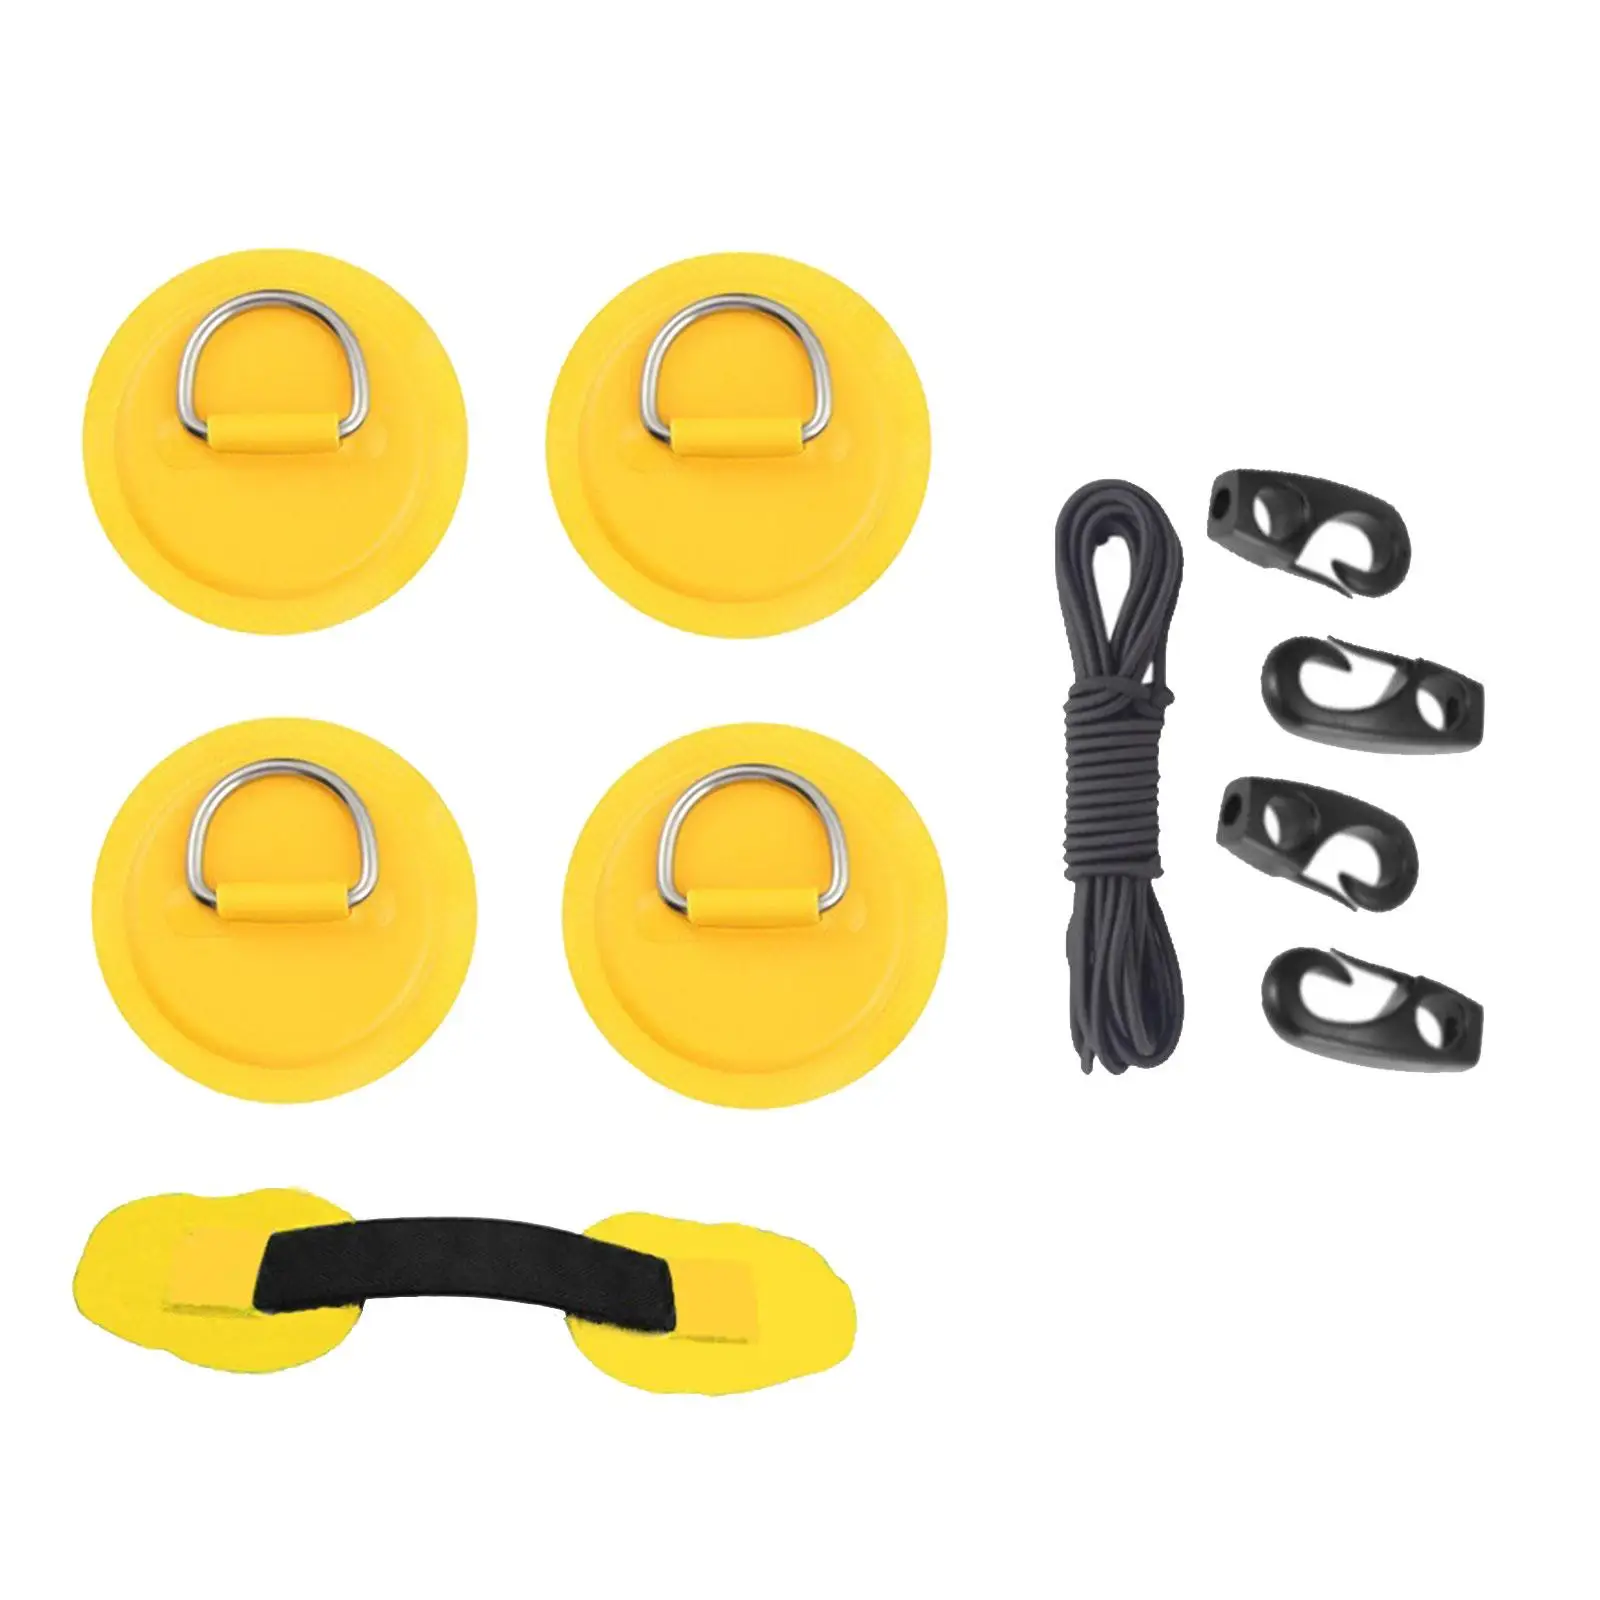 D Ring Pad Patch Bungee Accessories Set Round Patch for Inflatable Surfboard